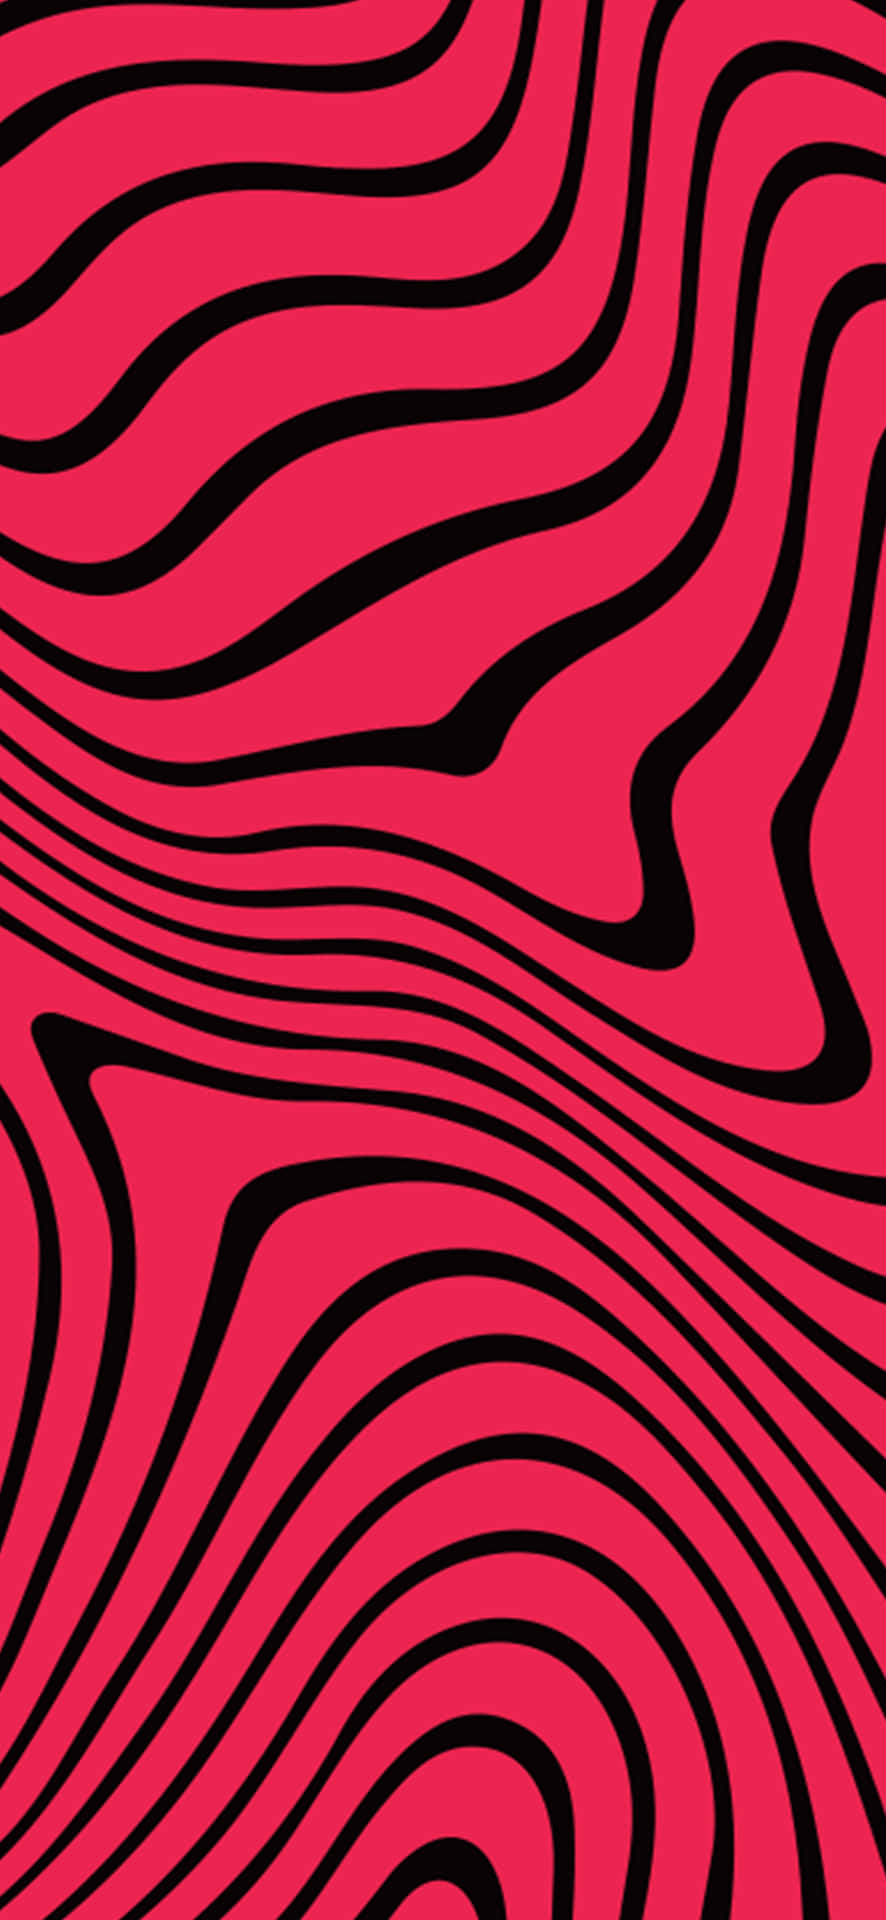 A Red And Black Zebra Pattern With Wavy Lines Wallpaper